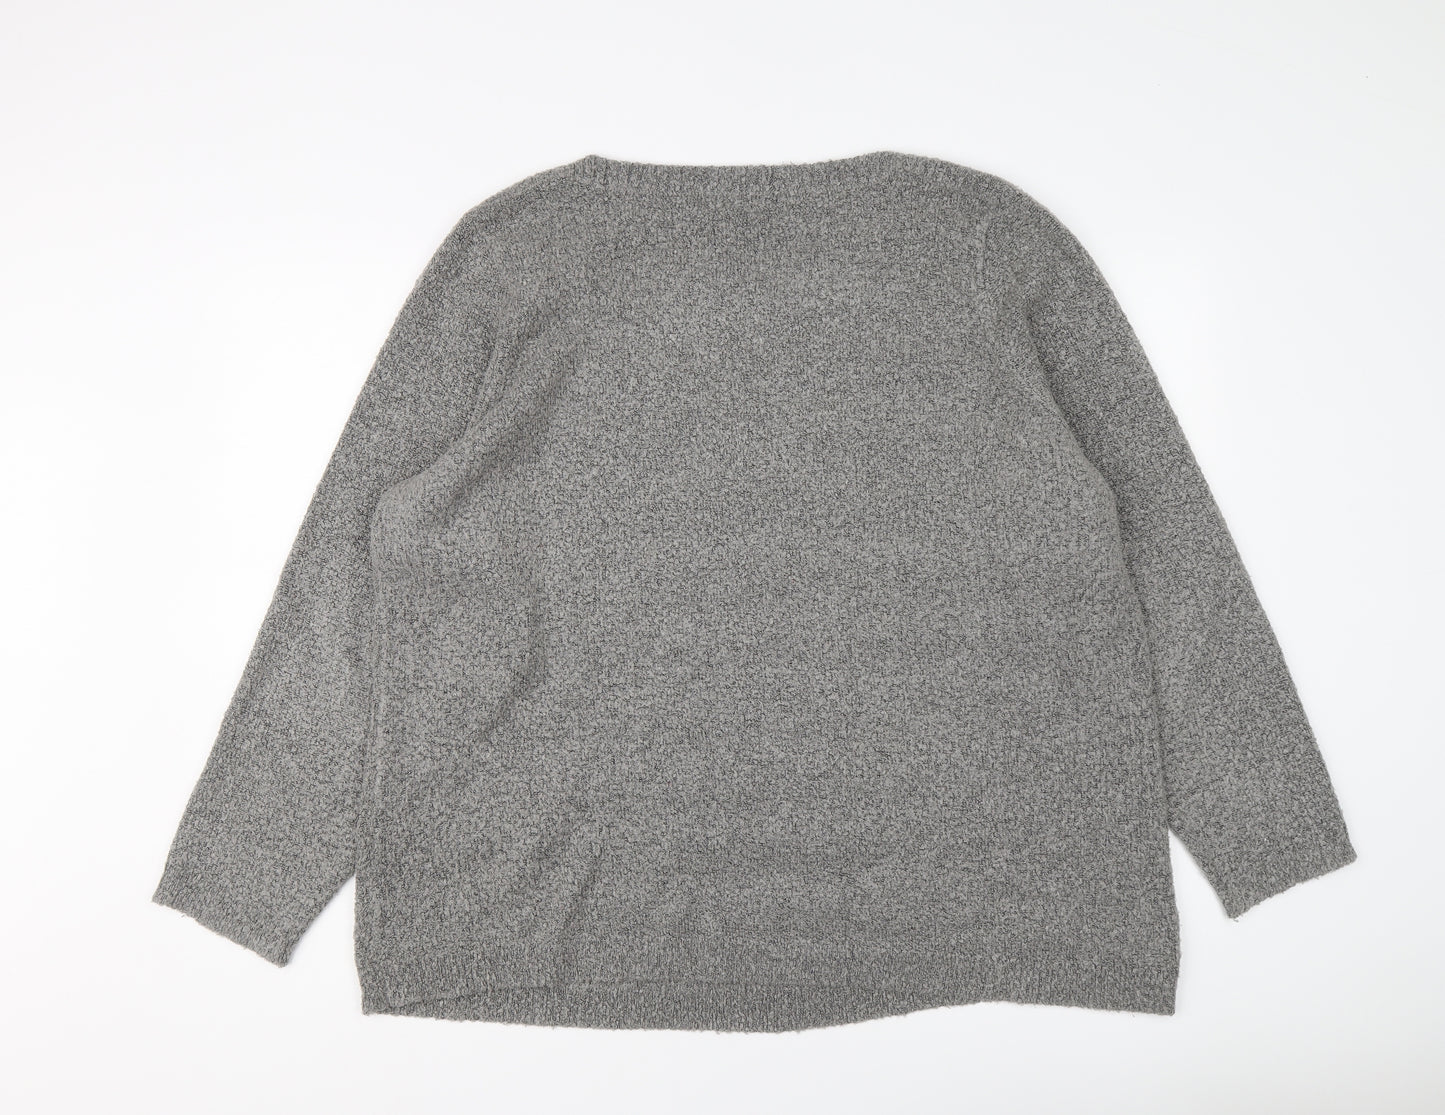 Bonmarché Womens Grey Round Neck Acrylic Pullover Jumper Size XL